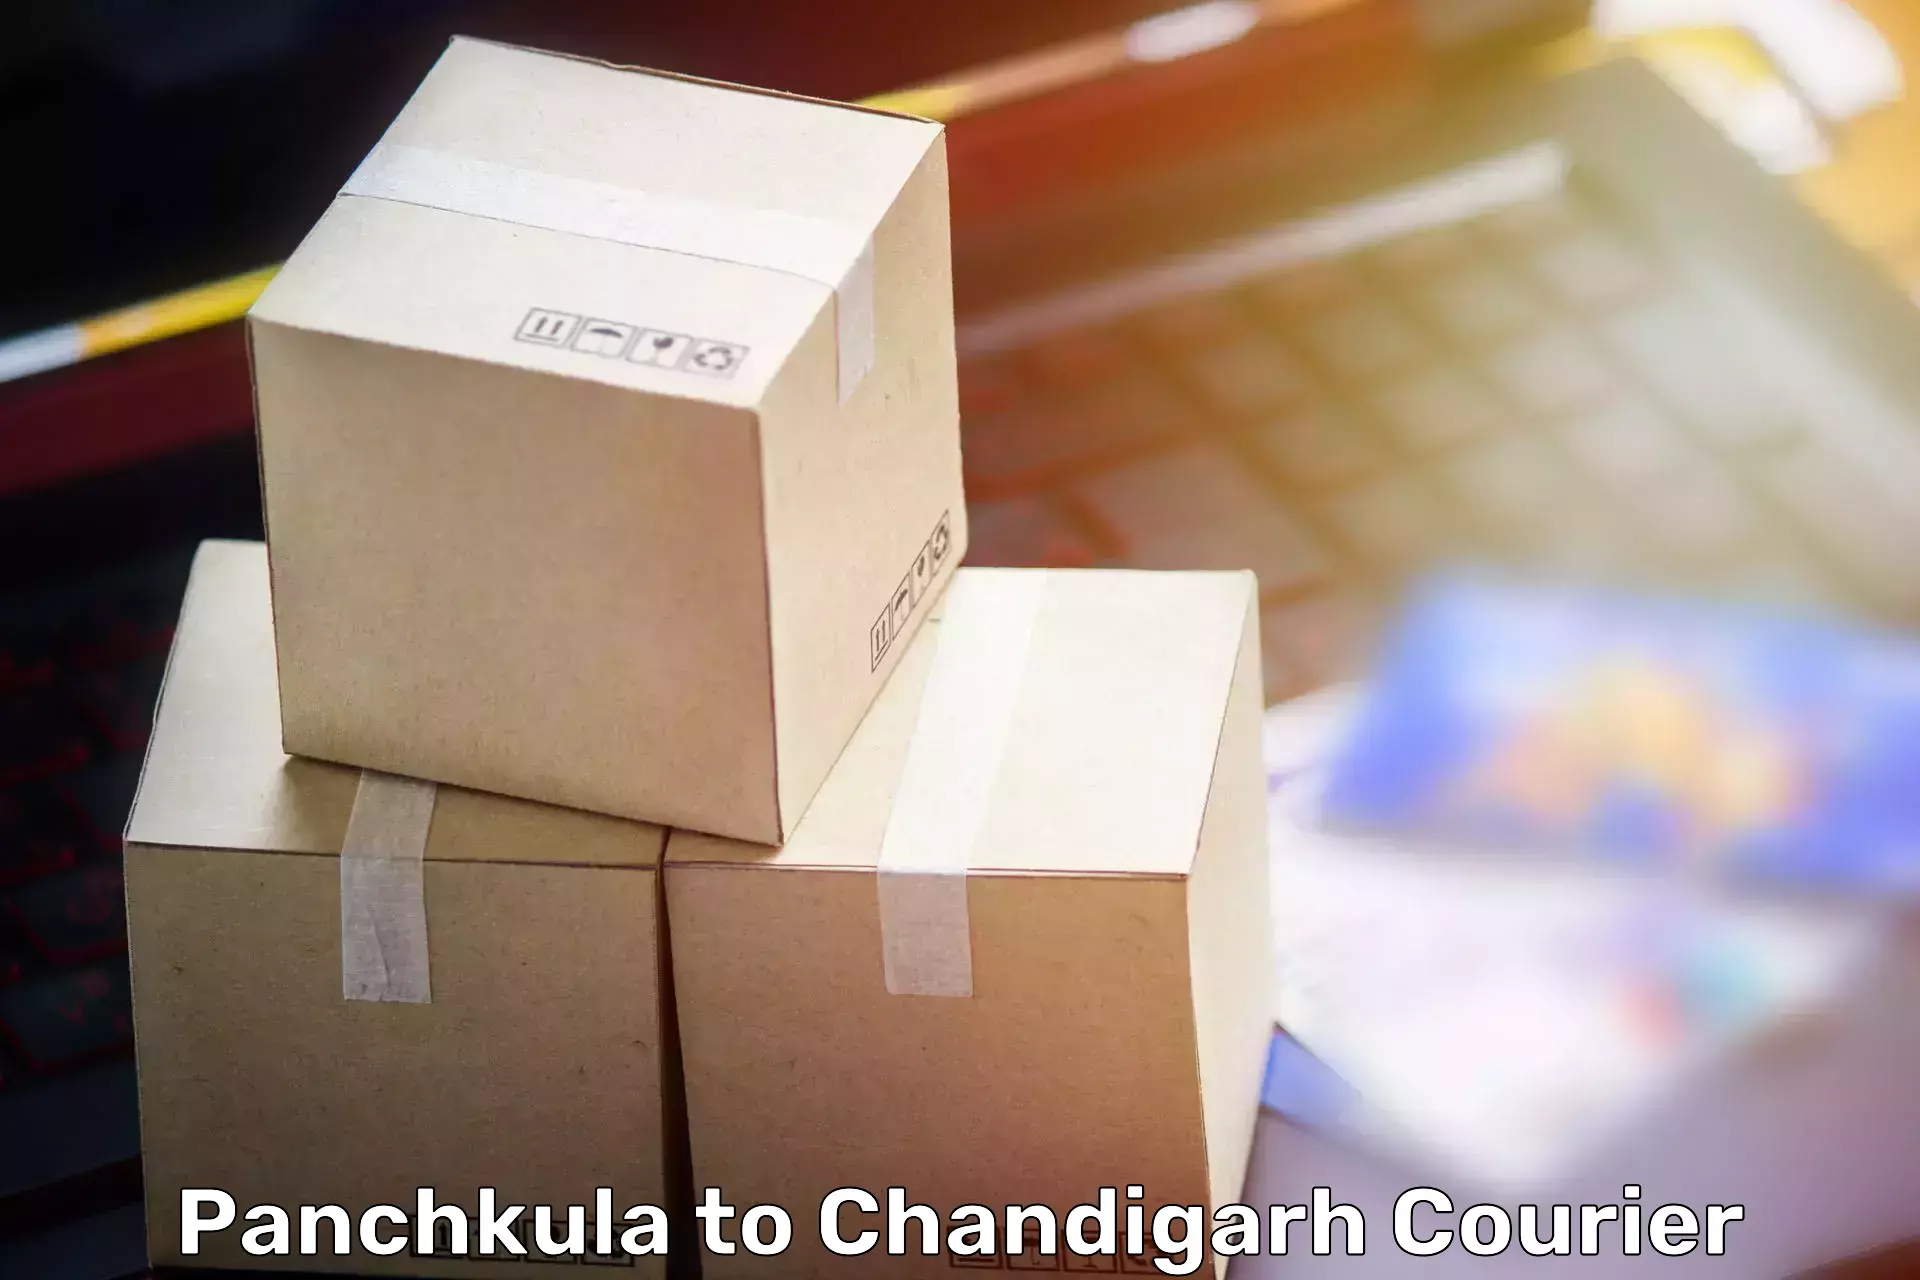 Efficient packing and moving Panchkula to Chandigarh